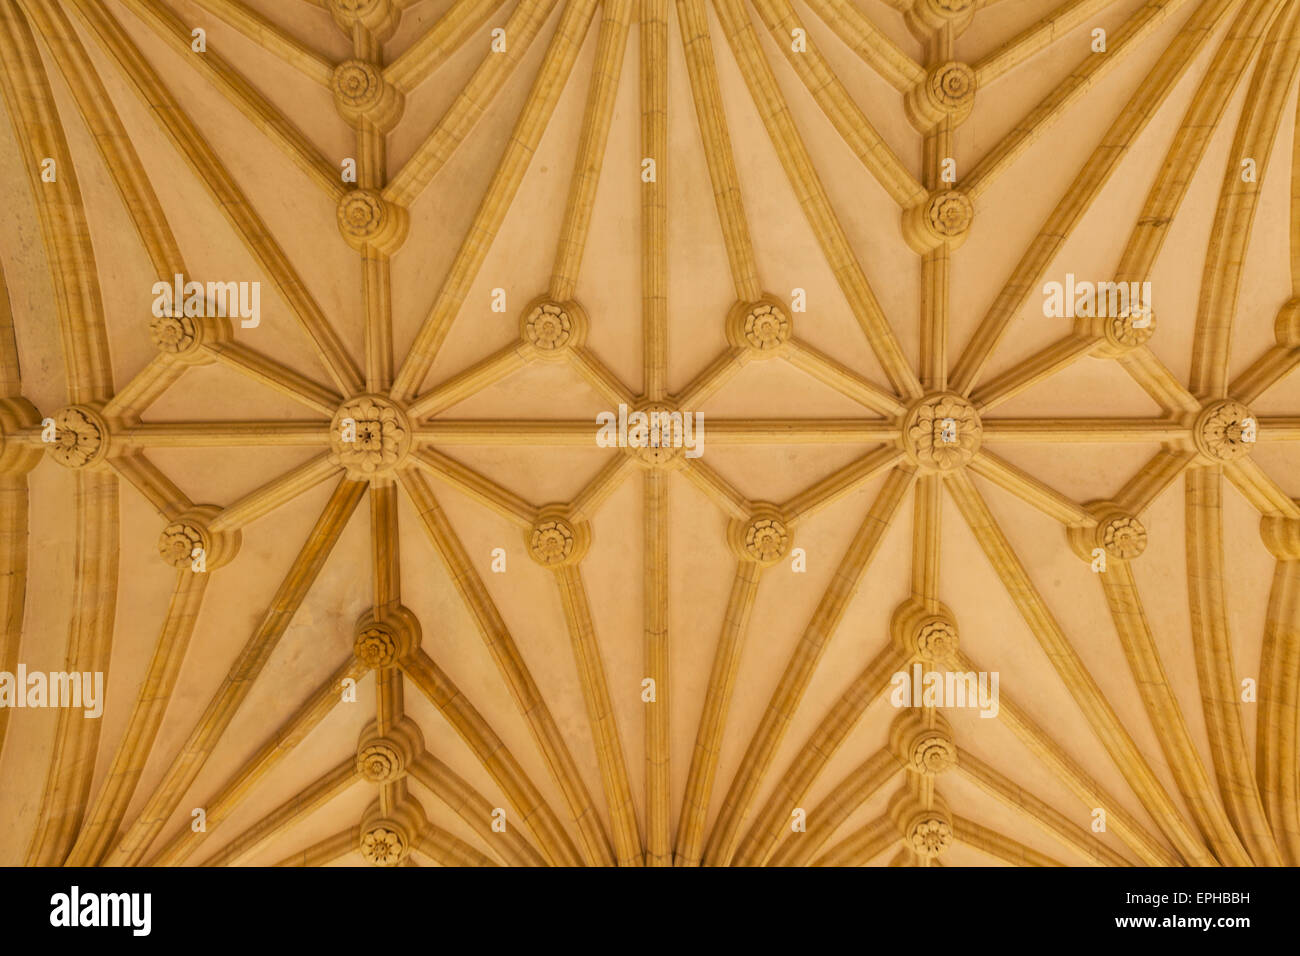 A decorated vaulted ceiling at Woodchester mansion, Gloucestershire, England Stock Photo